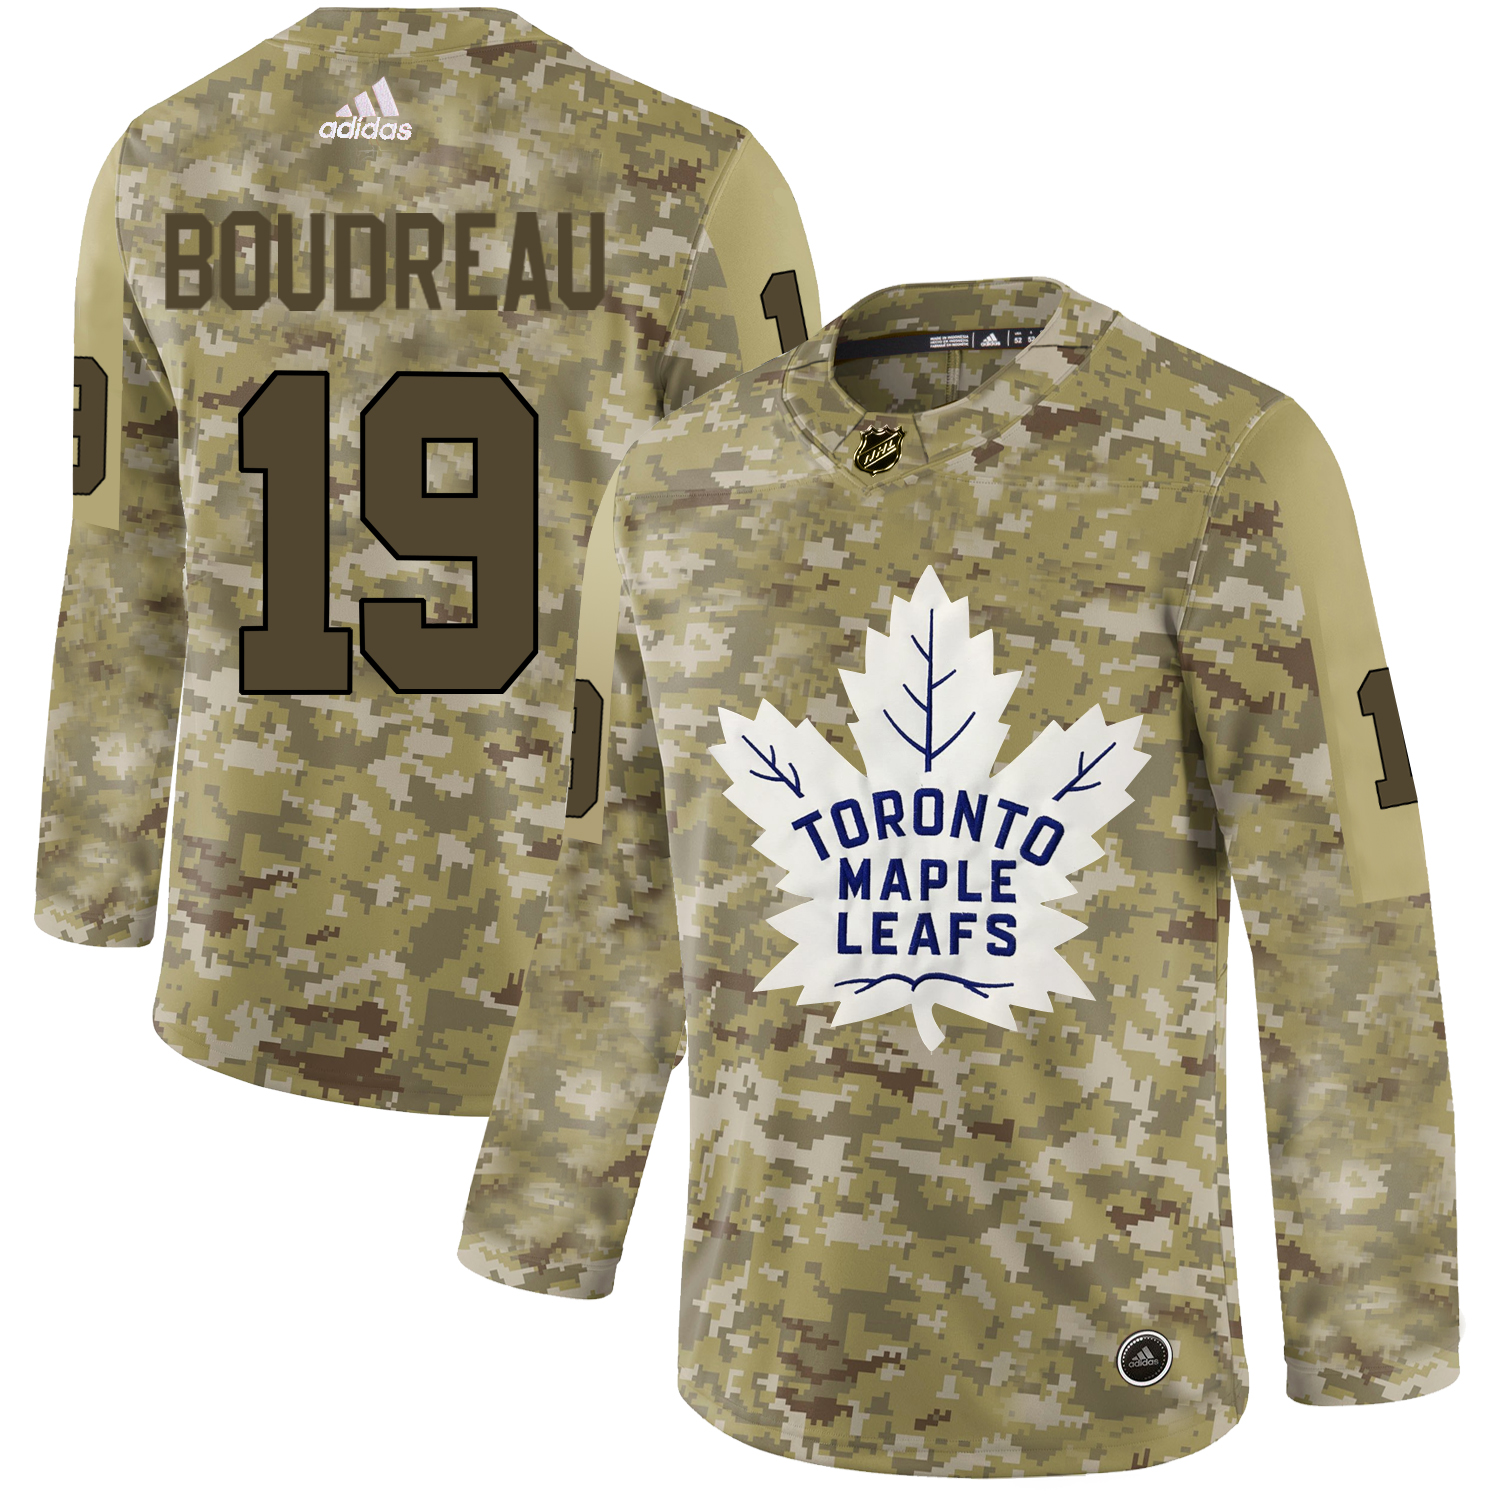 Adidas Maple Leafs #19 Bruce Boudreau Camo Authentic Stitched NHL Jersey